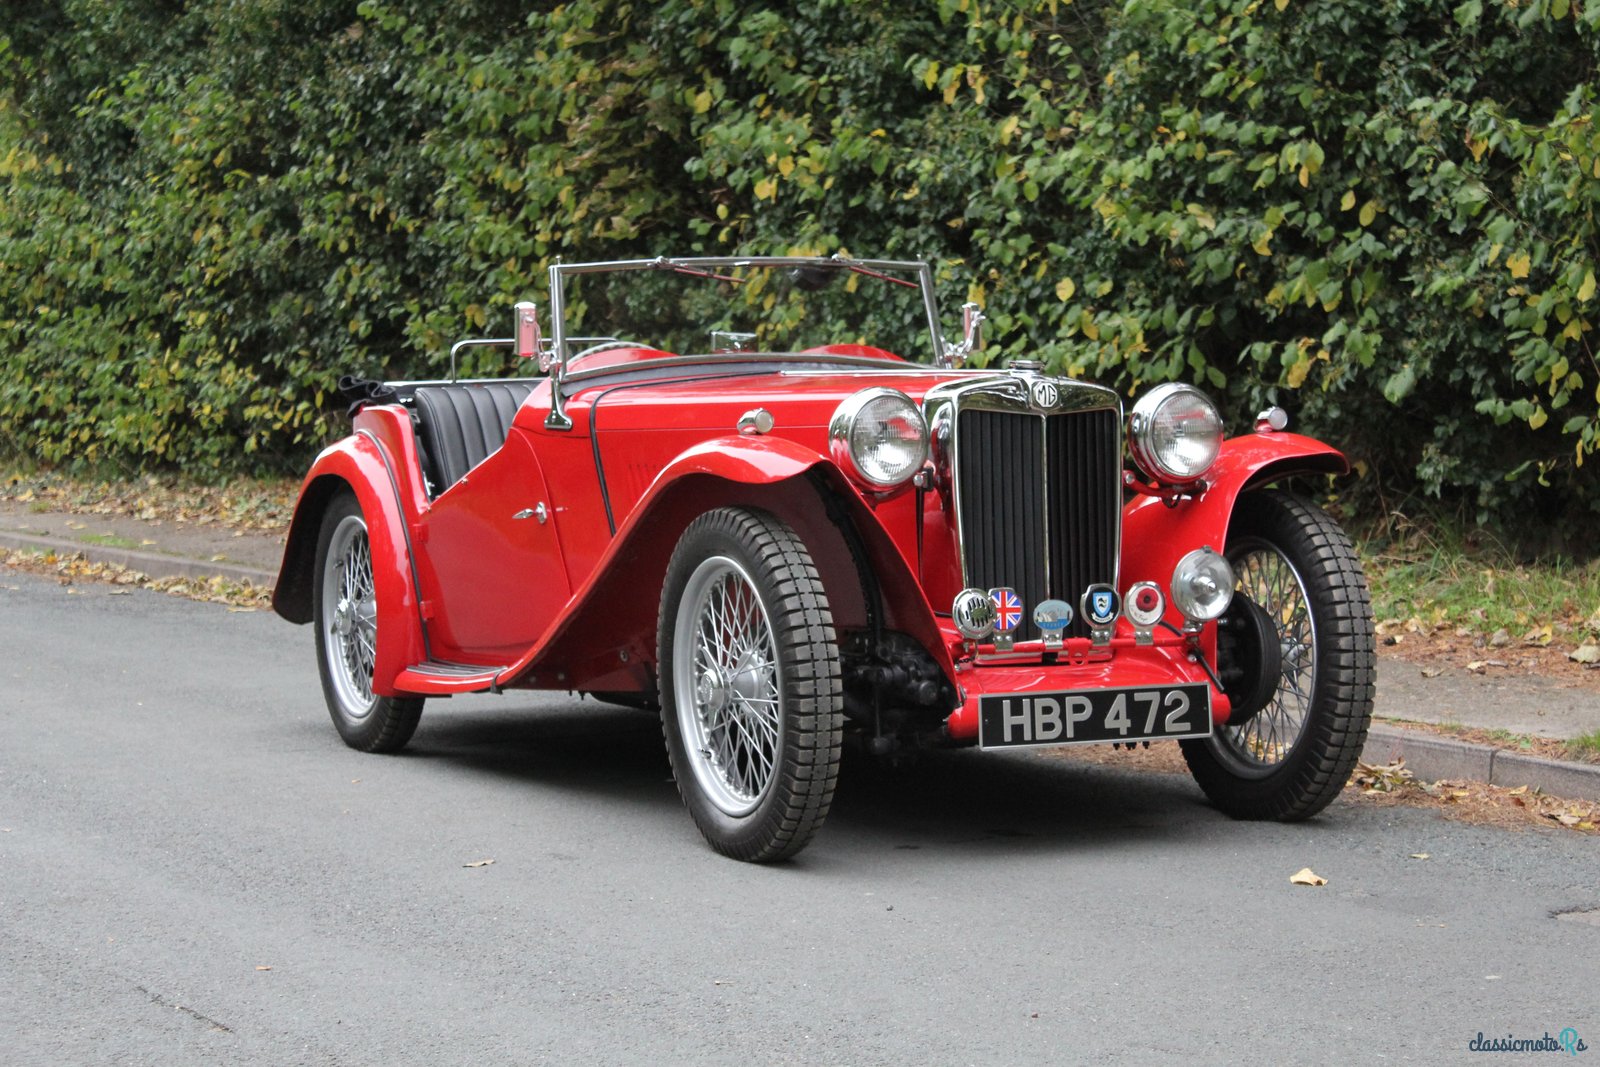 1946' MG TC for sale. Yorkshire